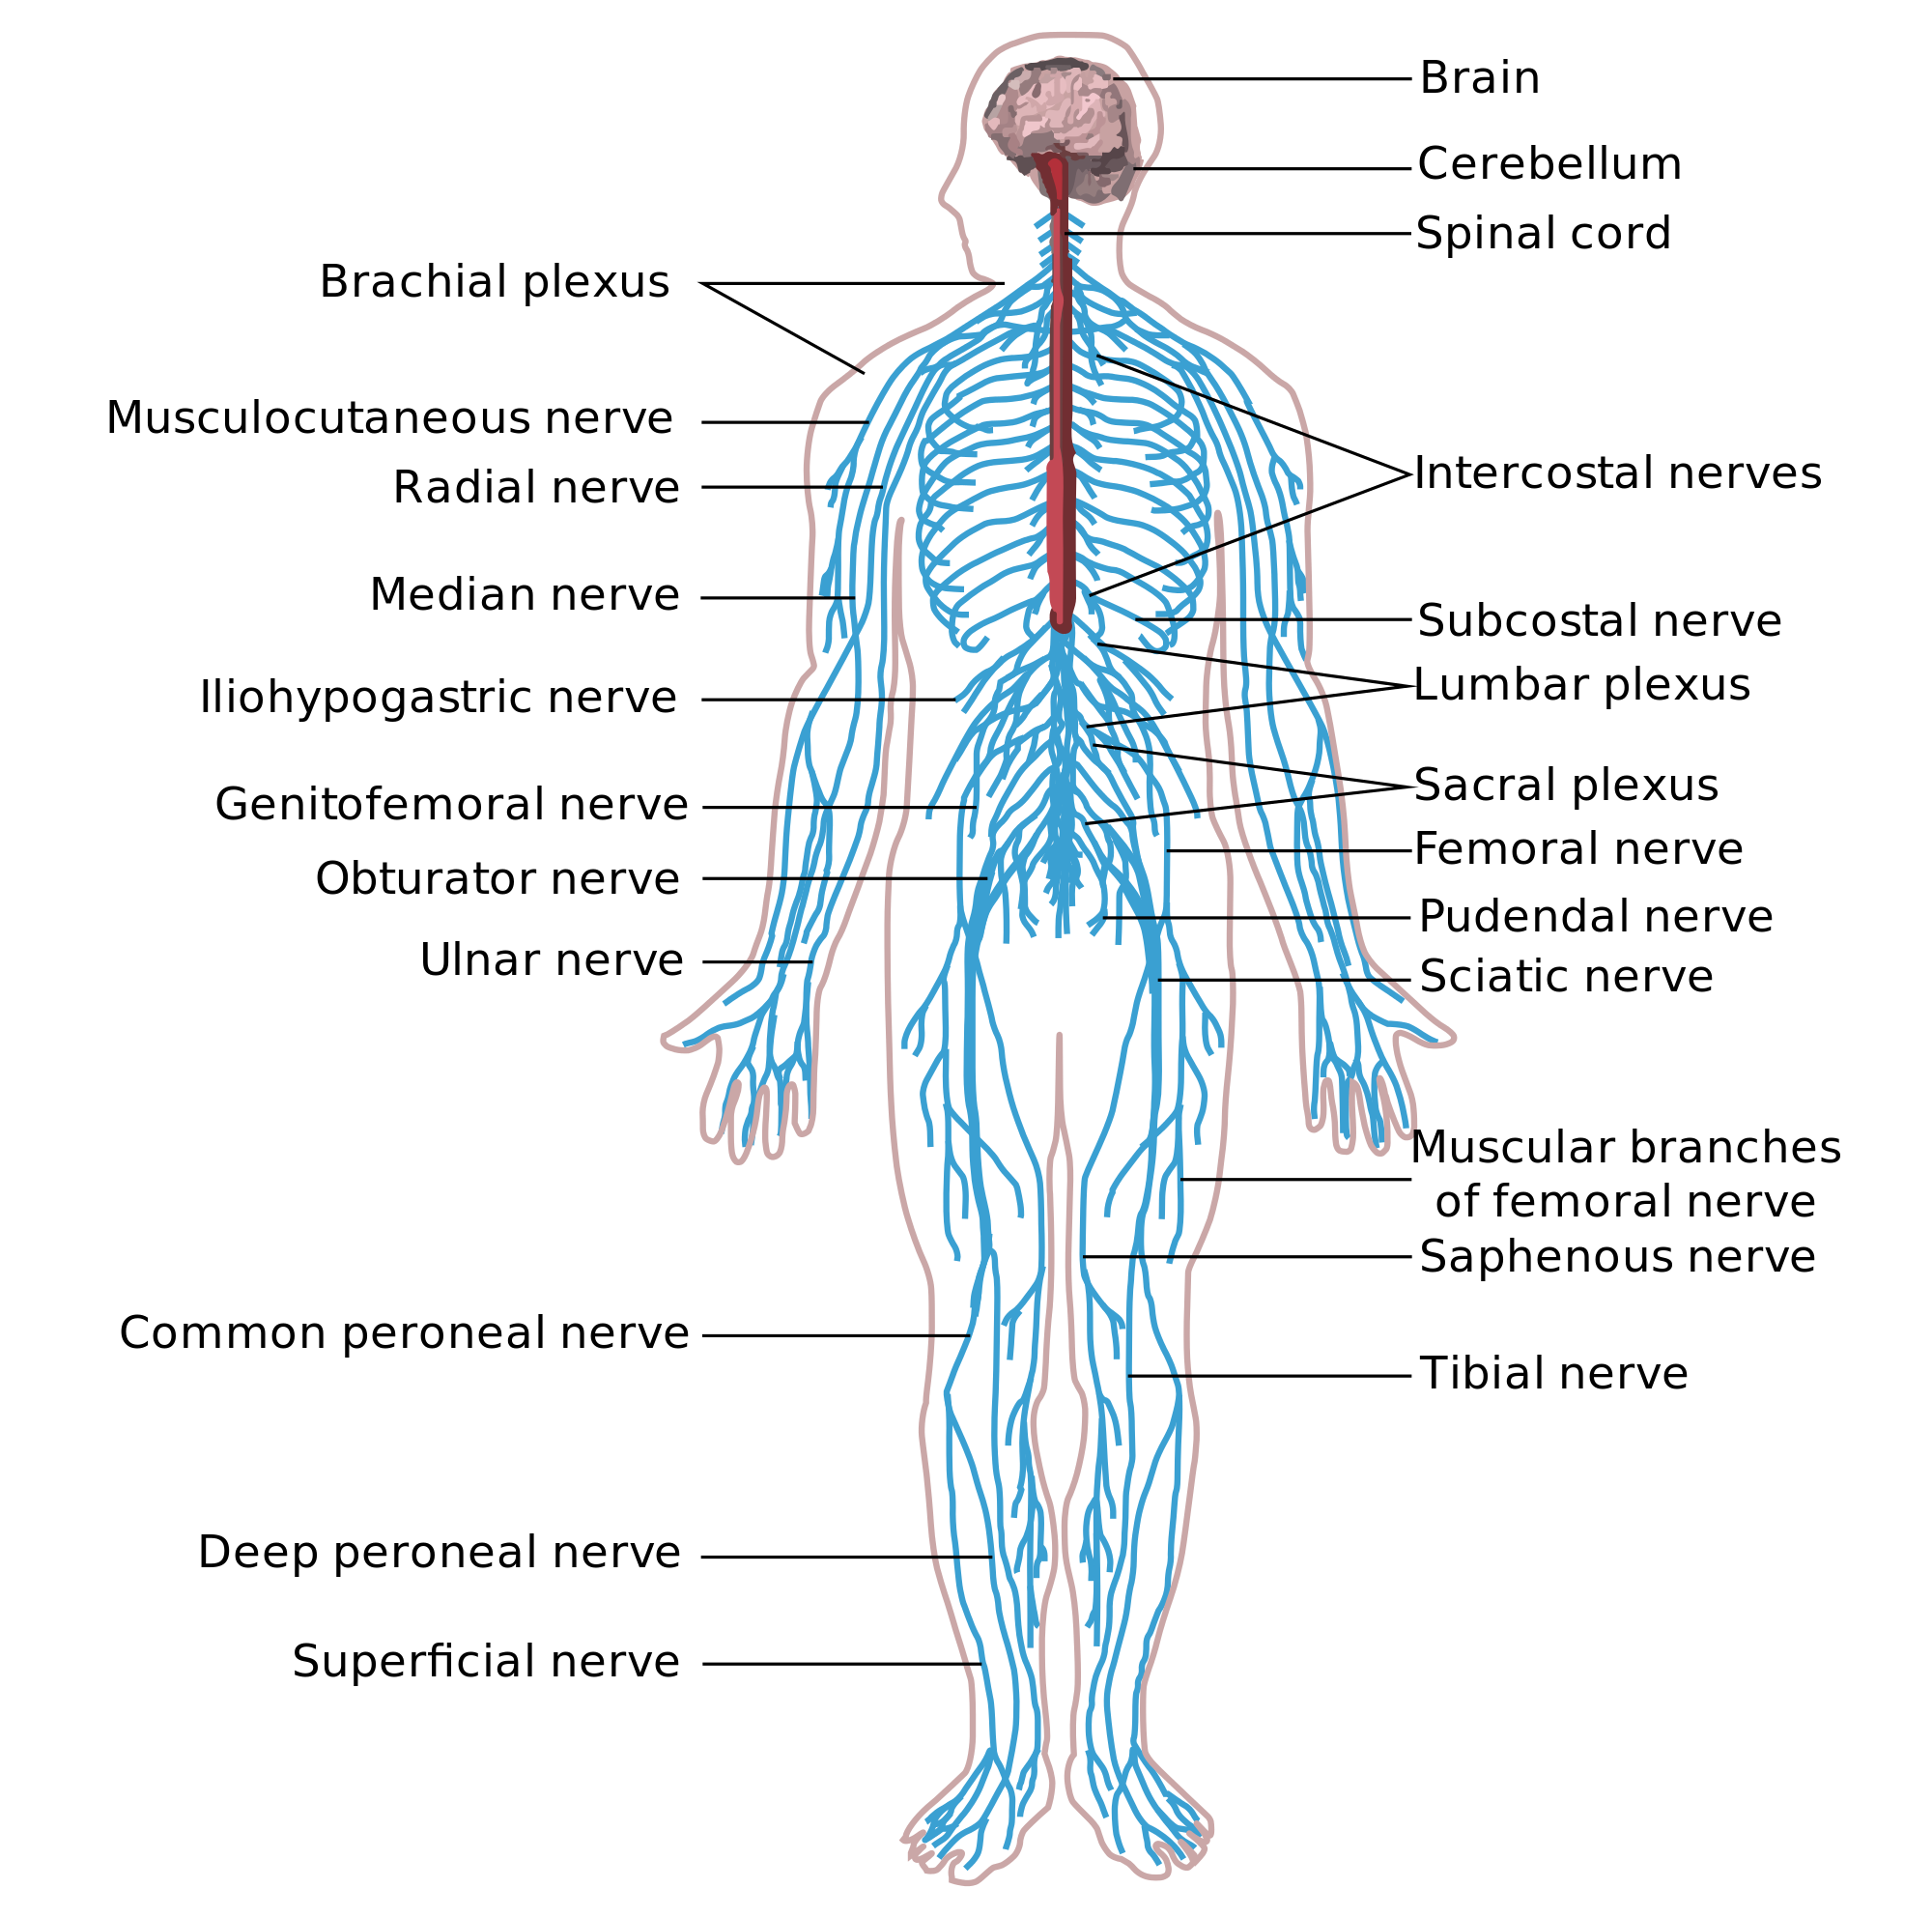 spinal-cord-partes-del-sistema-nervioso-periferico-png-download-images